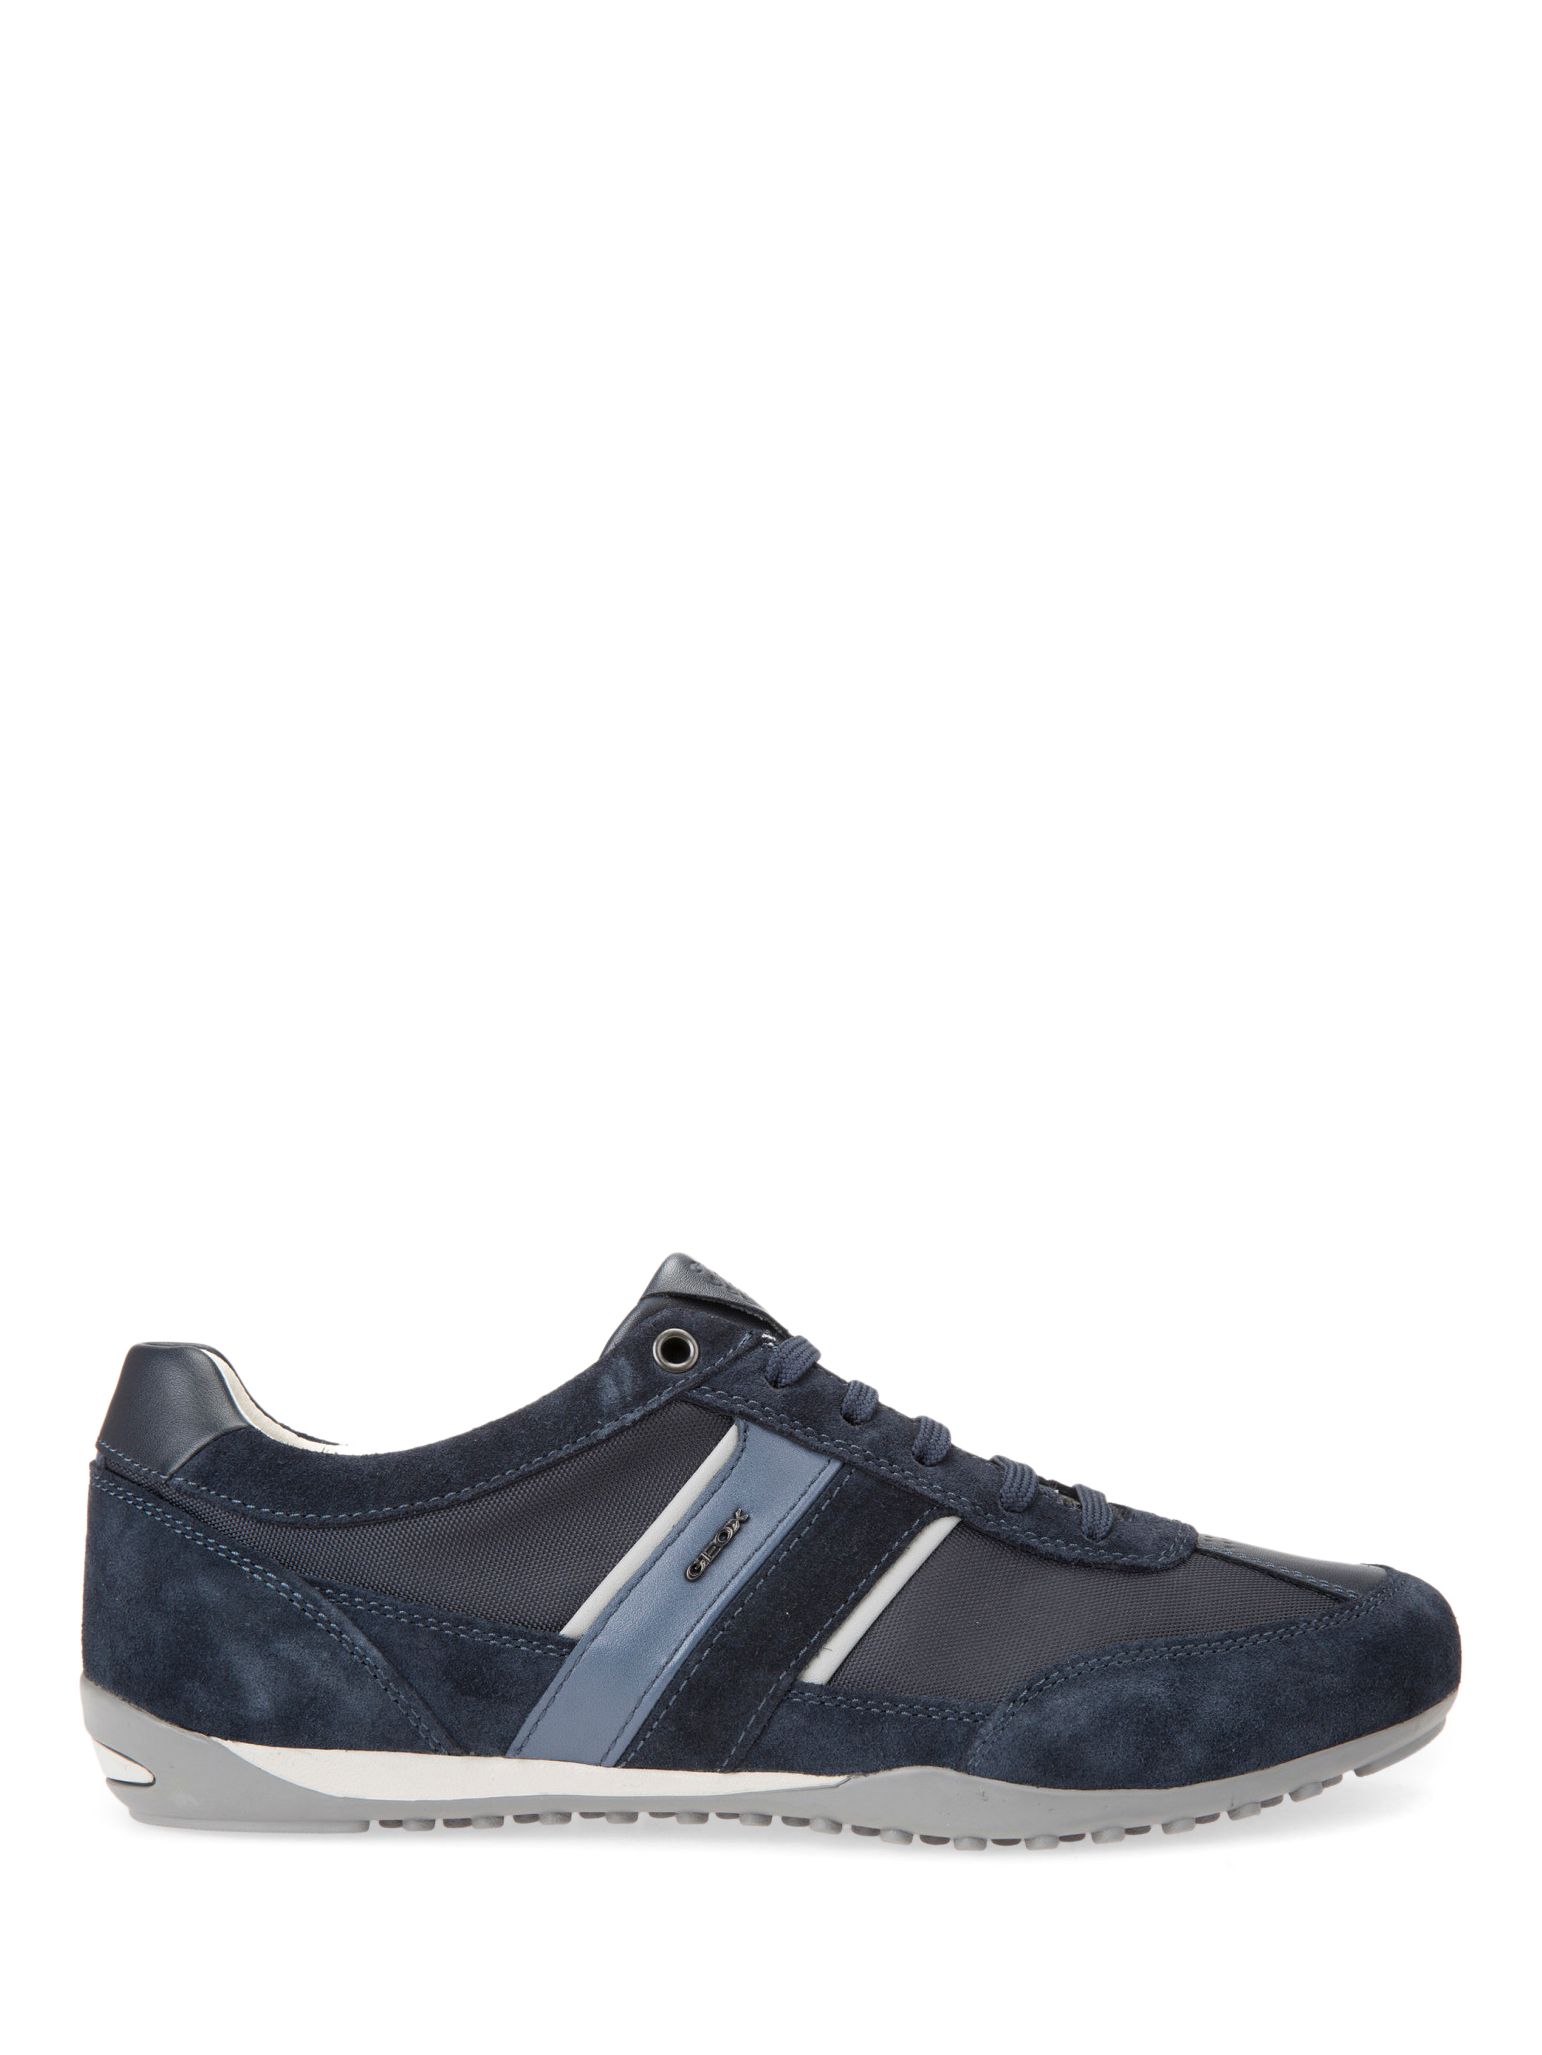 Geox Wells Trainers, Blue at John Lewis & Partners